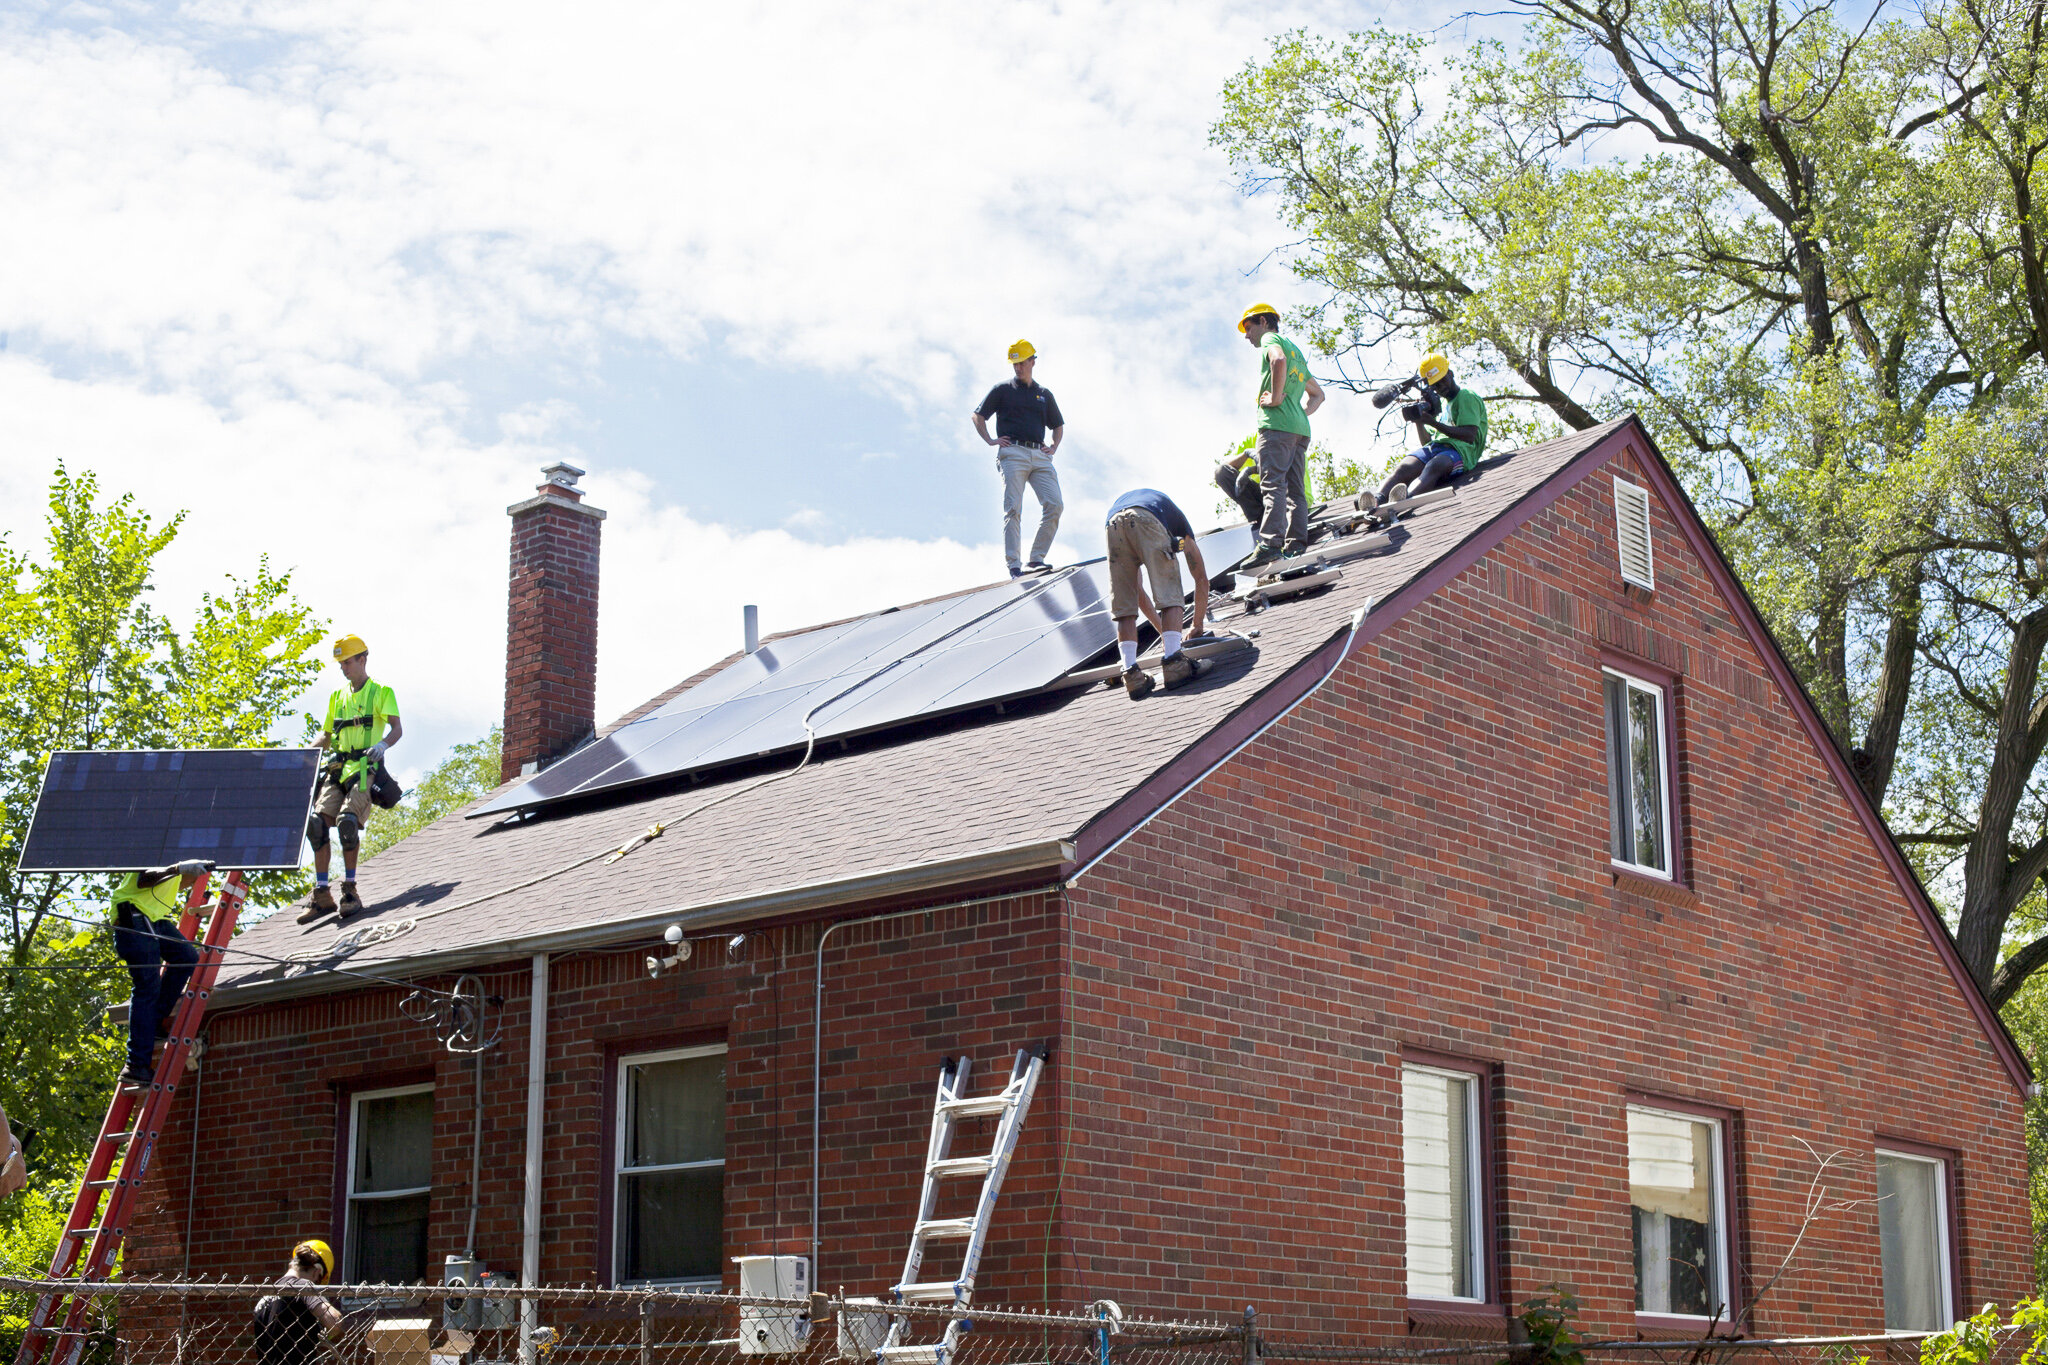  Technicians from our friends at REC Solar near completion on a rooftop solar installation. 